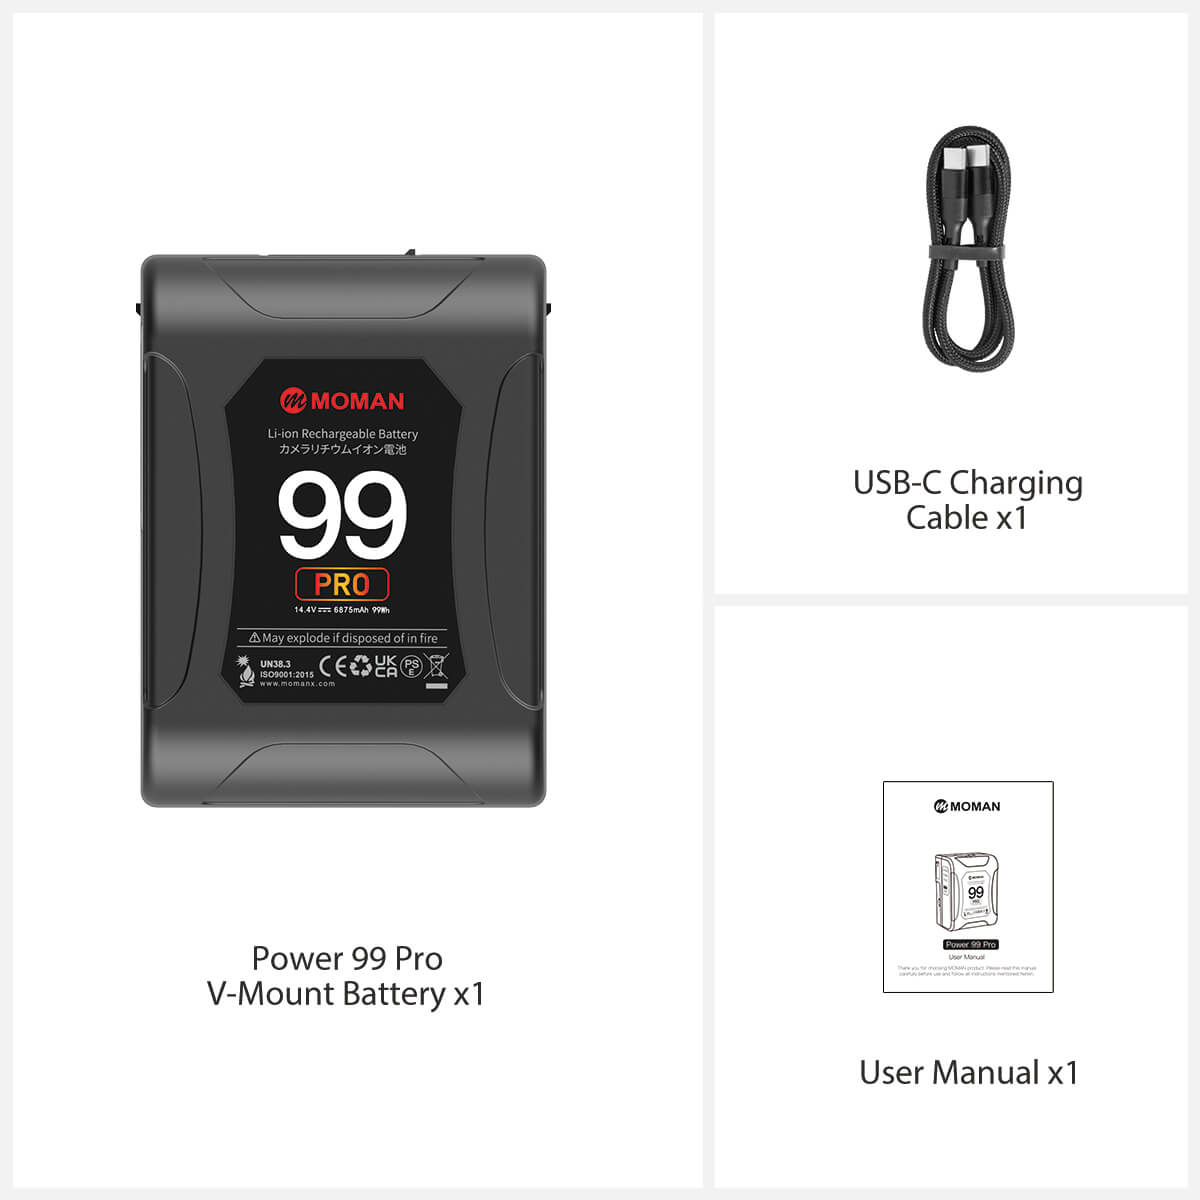 Moman Power 99 Pro's package includes a 99wh external power source, a USB-C charging cable, and a user manual.